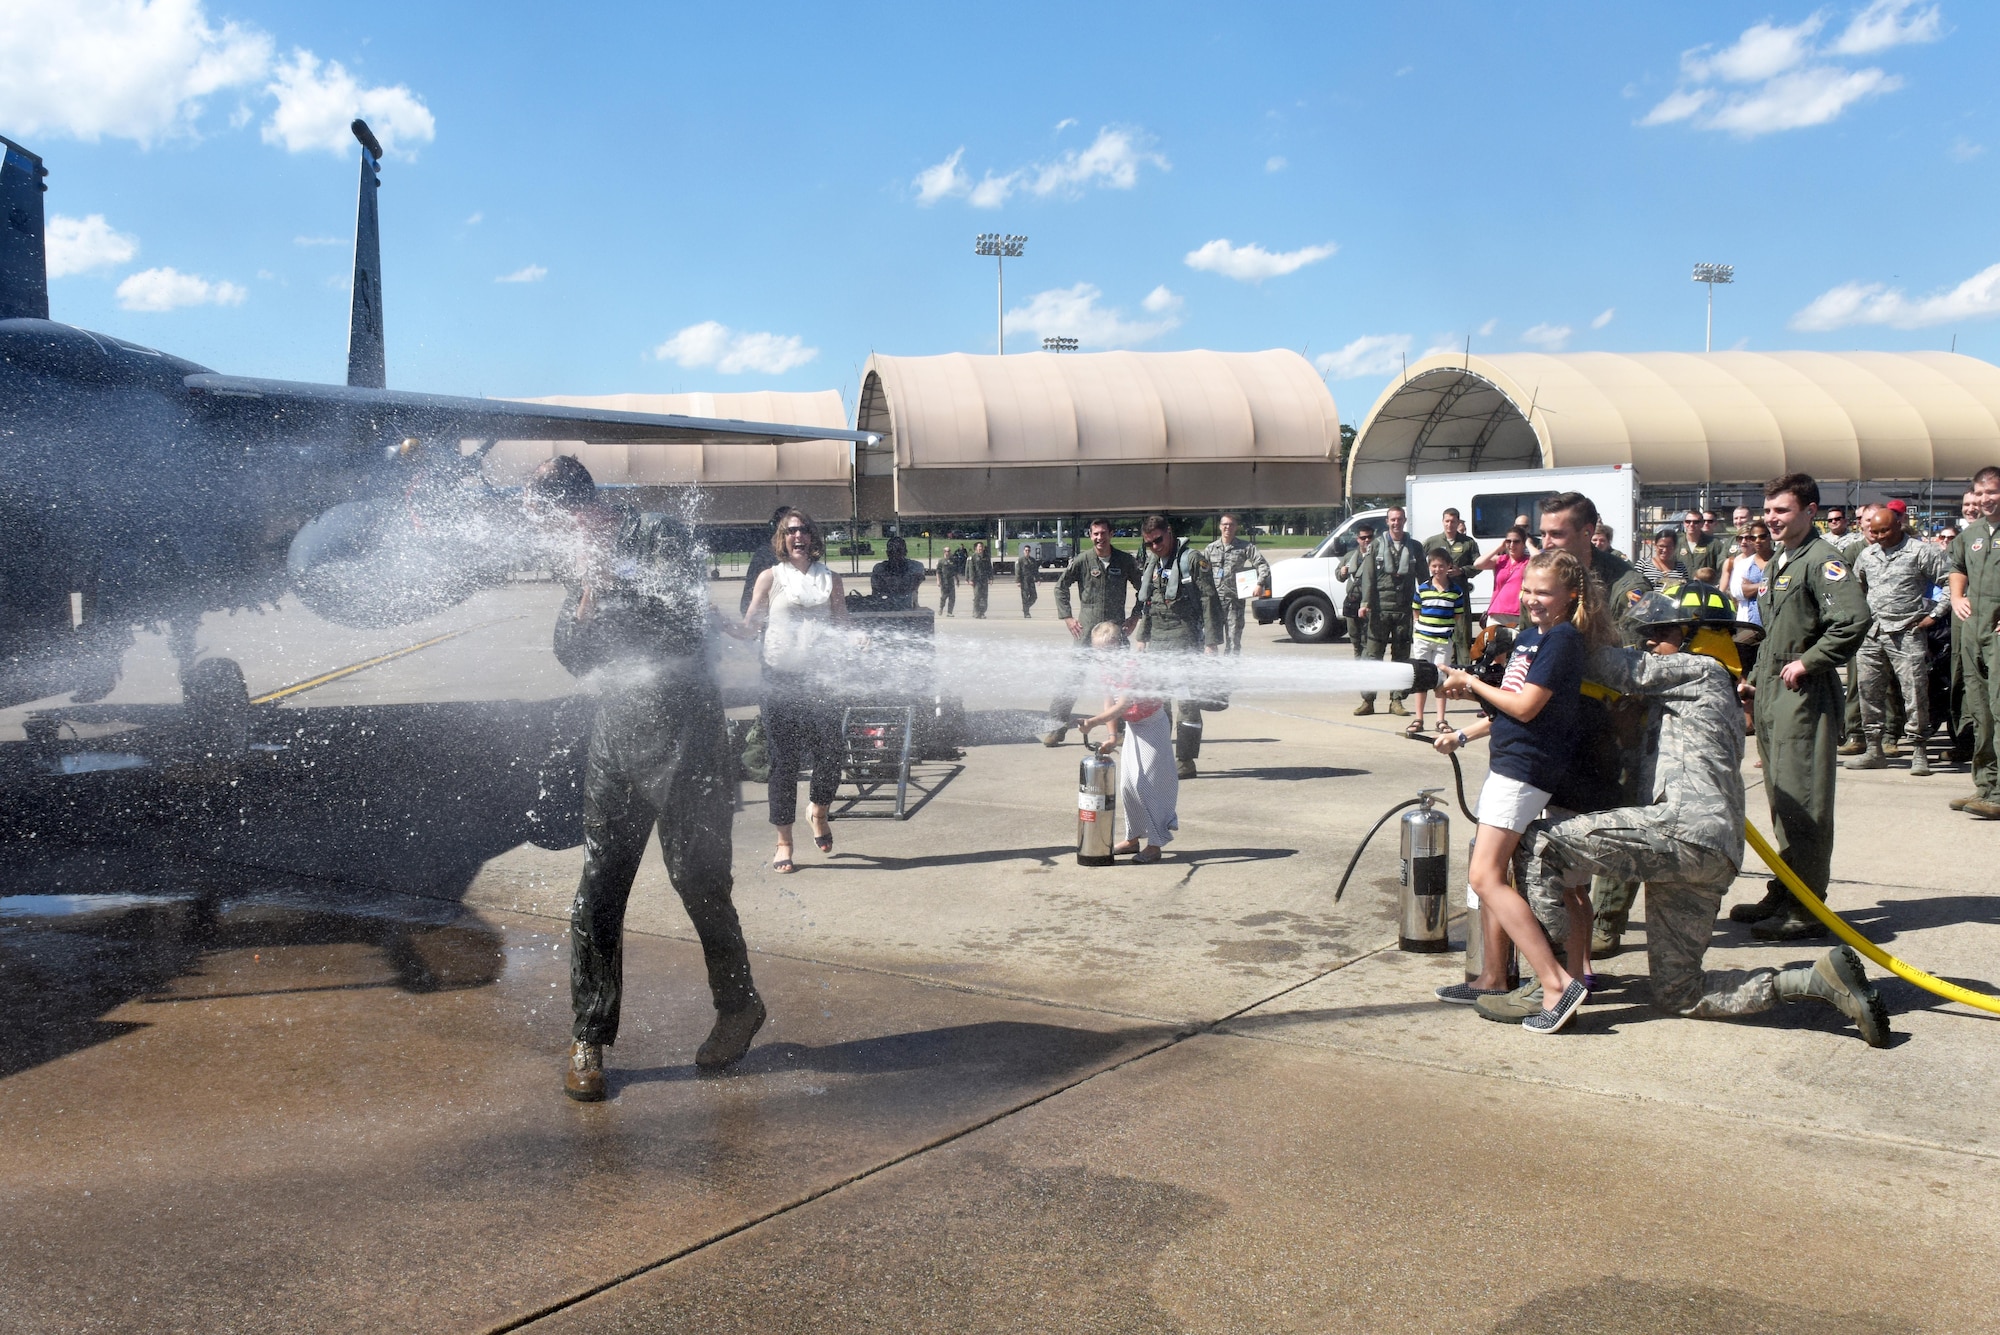 Col. Brian Afflerbaugh, 4th Operations Group commander, is hosed down by his family June 8, 2016, following his final F-15E Strike Eagle flight at Seymour Johnson Air Force Base, North Carolina. Supporters from around the base came to commemorate the moment and thank Afflerbaugh for his contributions to the installation. (U.S. Air Force photo/Tech. Sgt. Chuck Broadway)